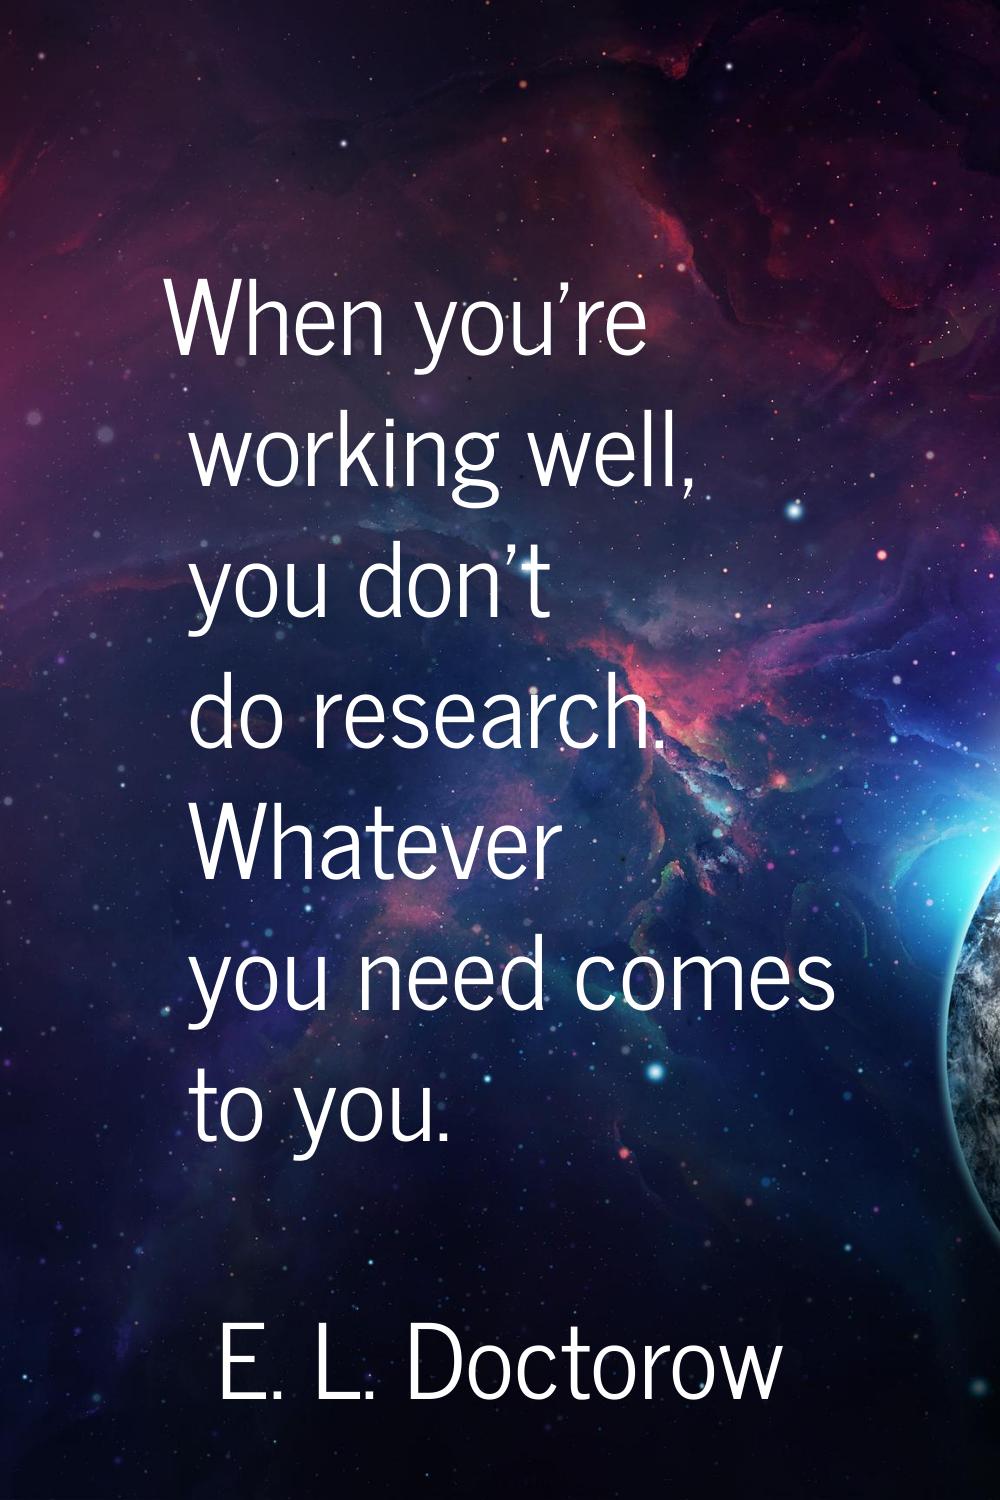 When you're working well, you don't do research. Whatever you need comes to you.